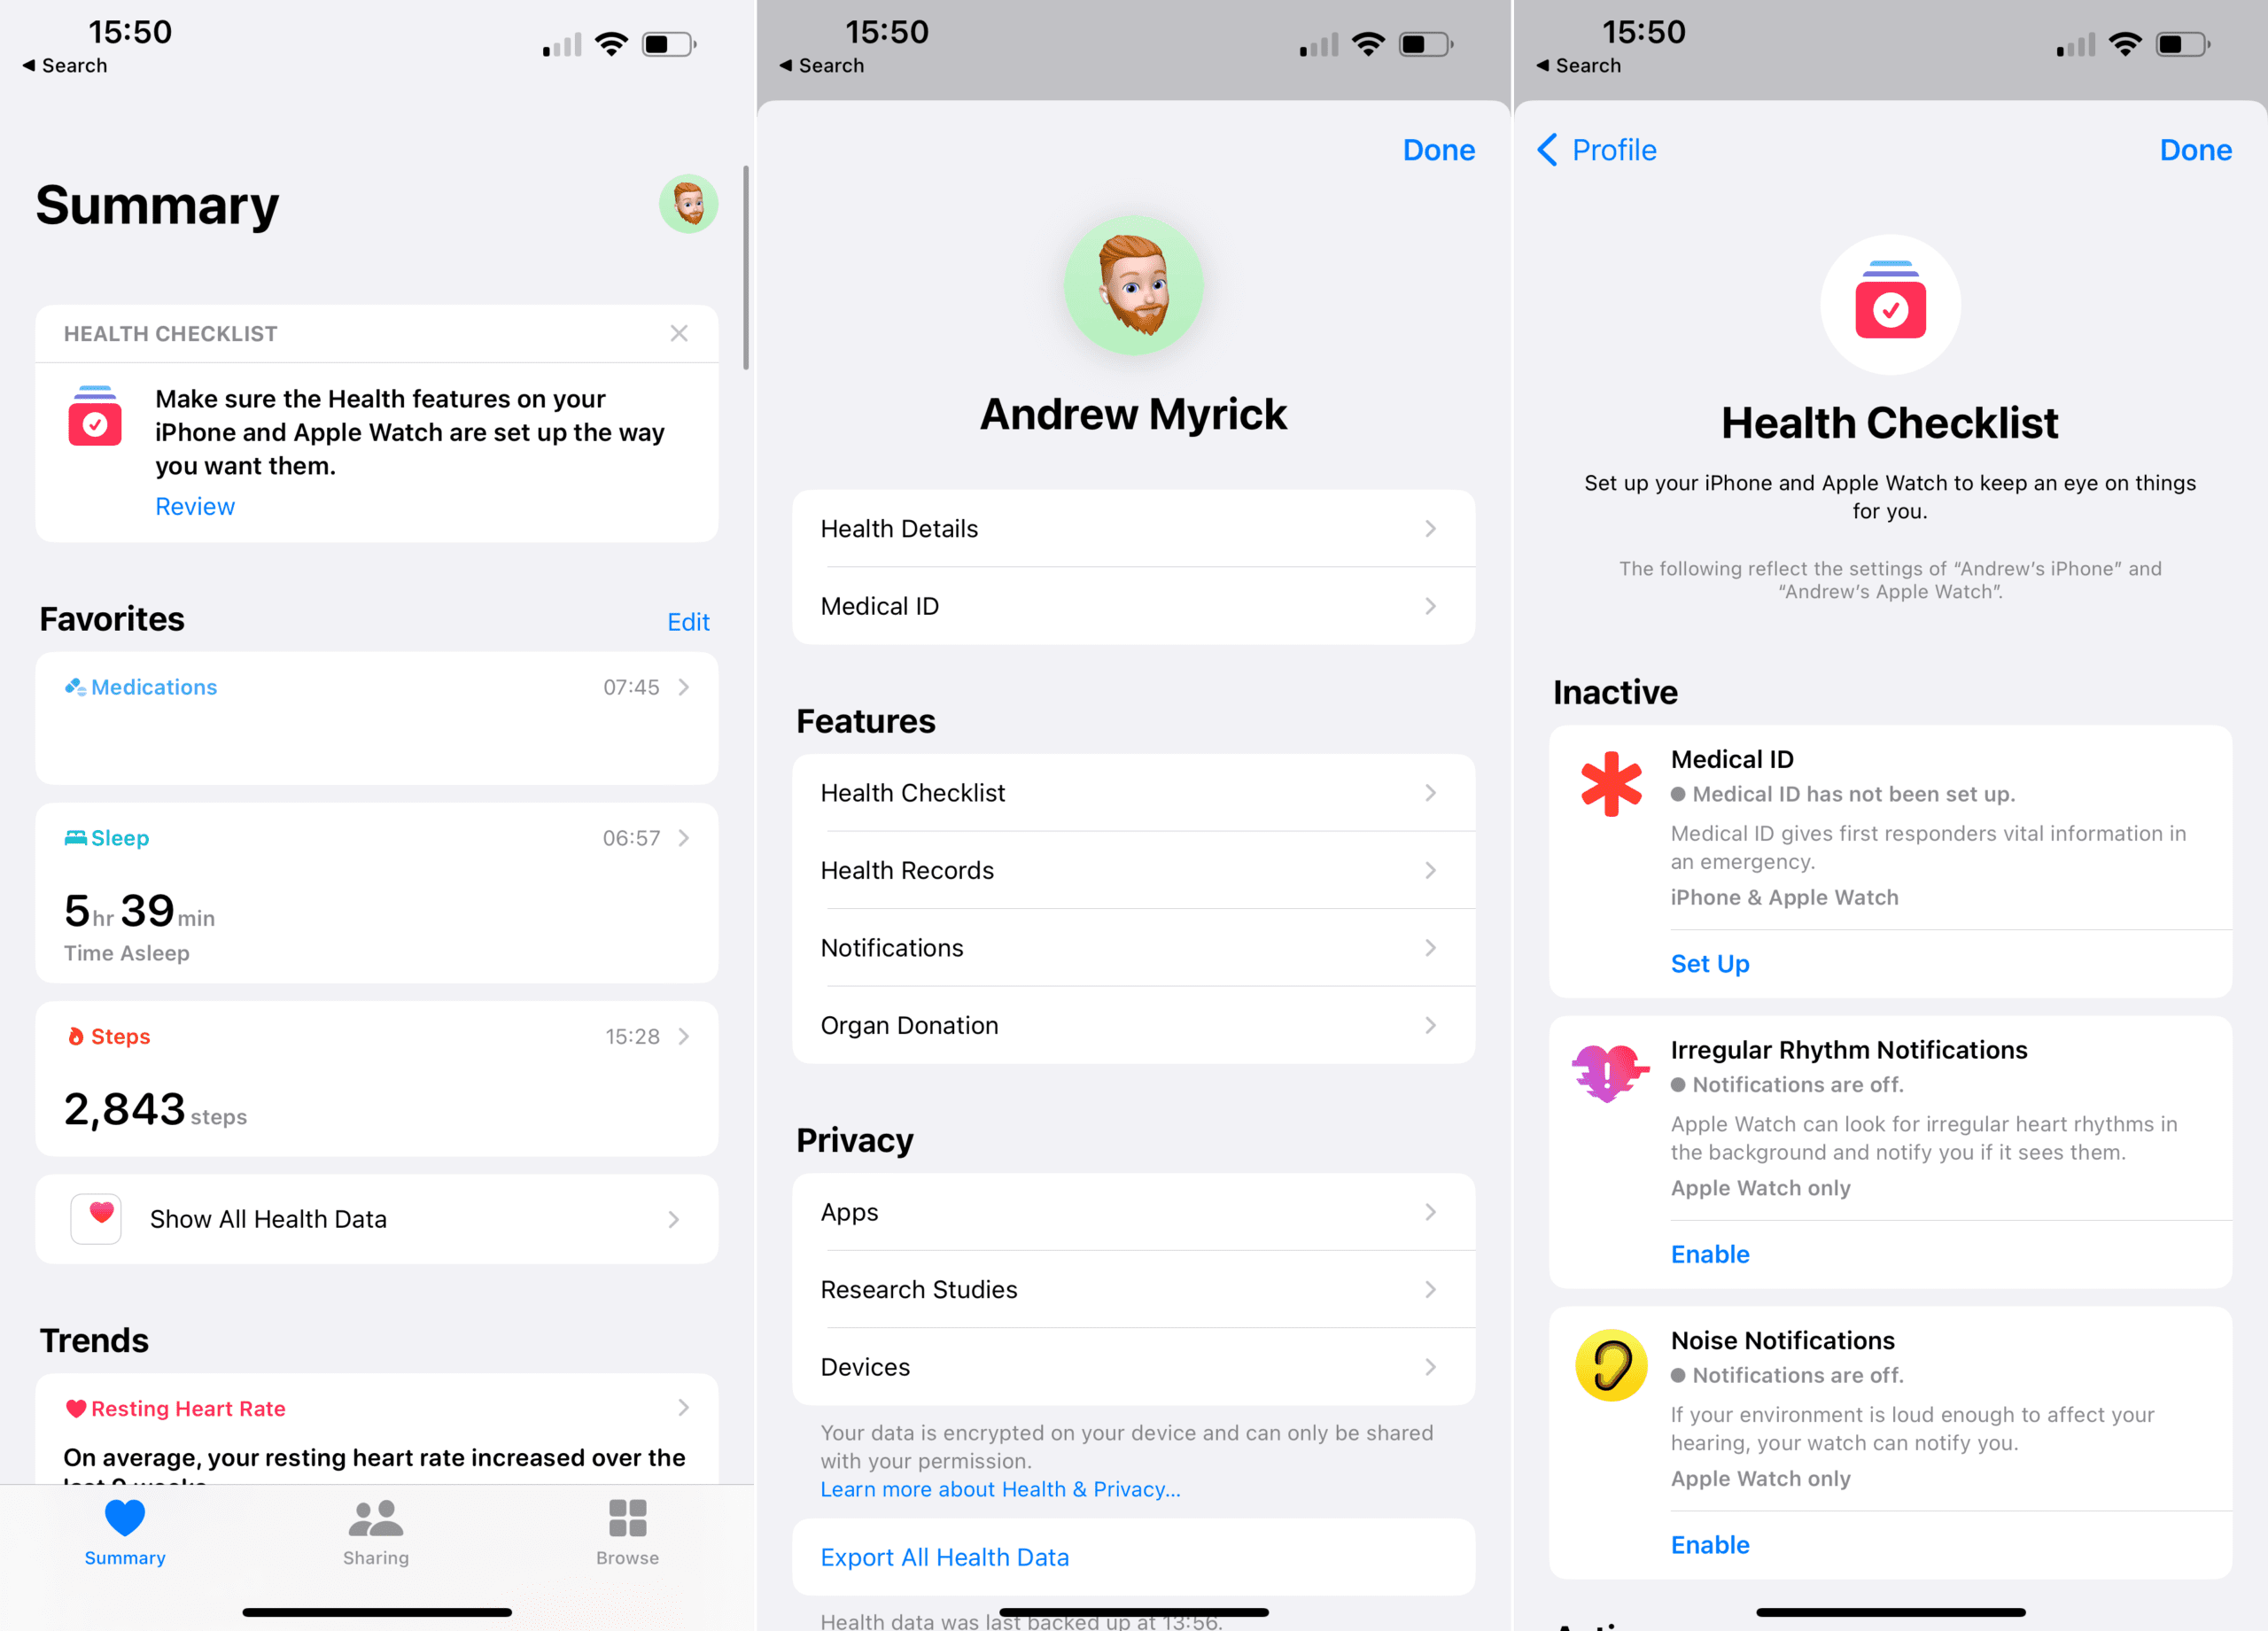 How to use Health Checklist on iPhone and Apple Watch